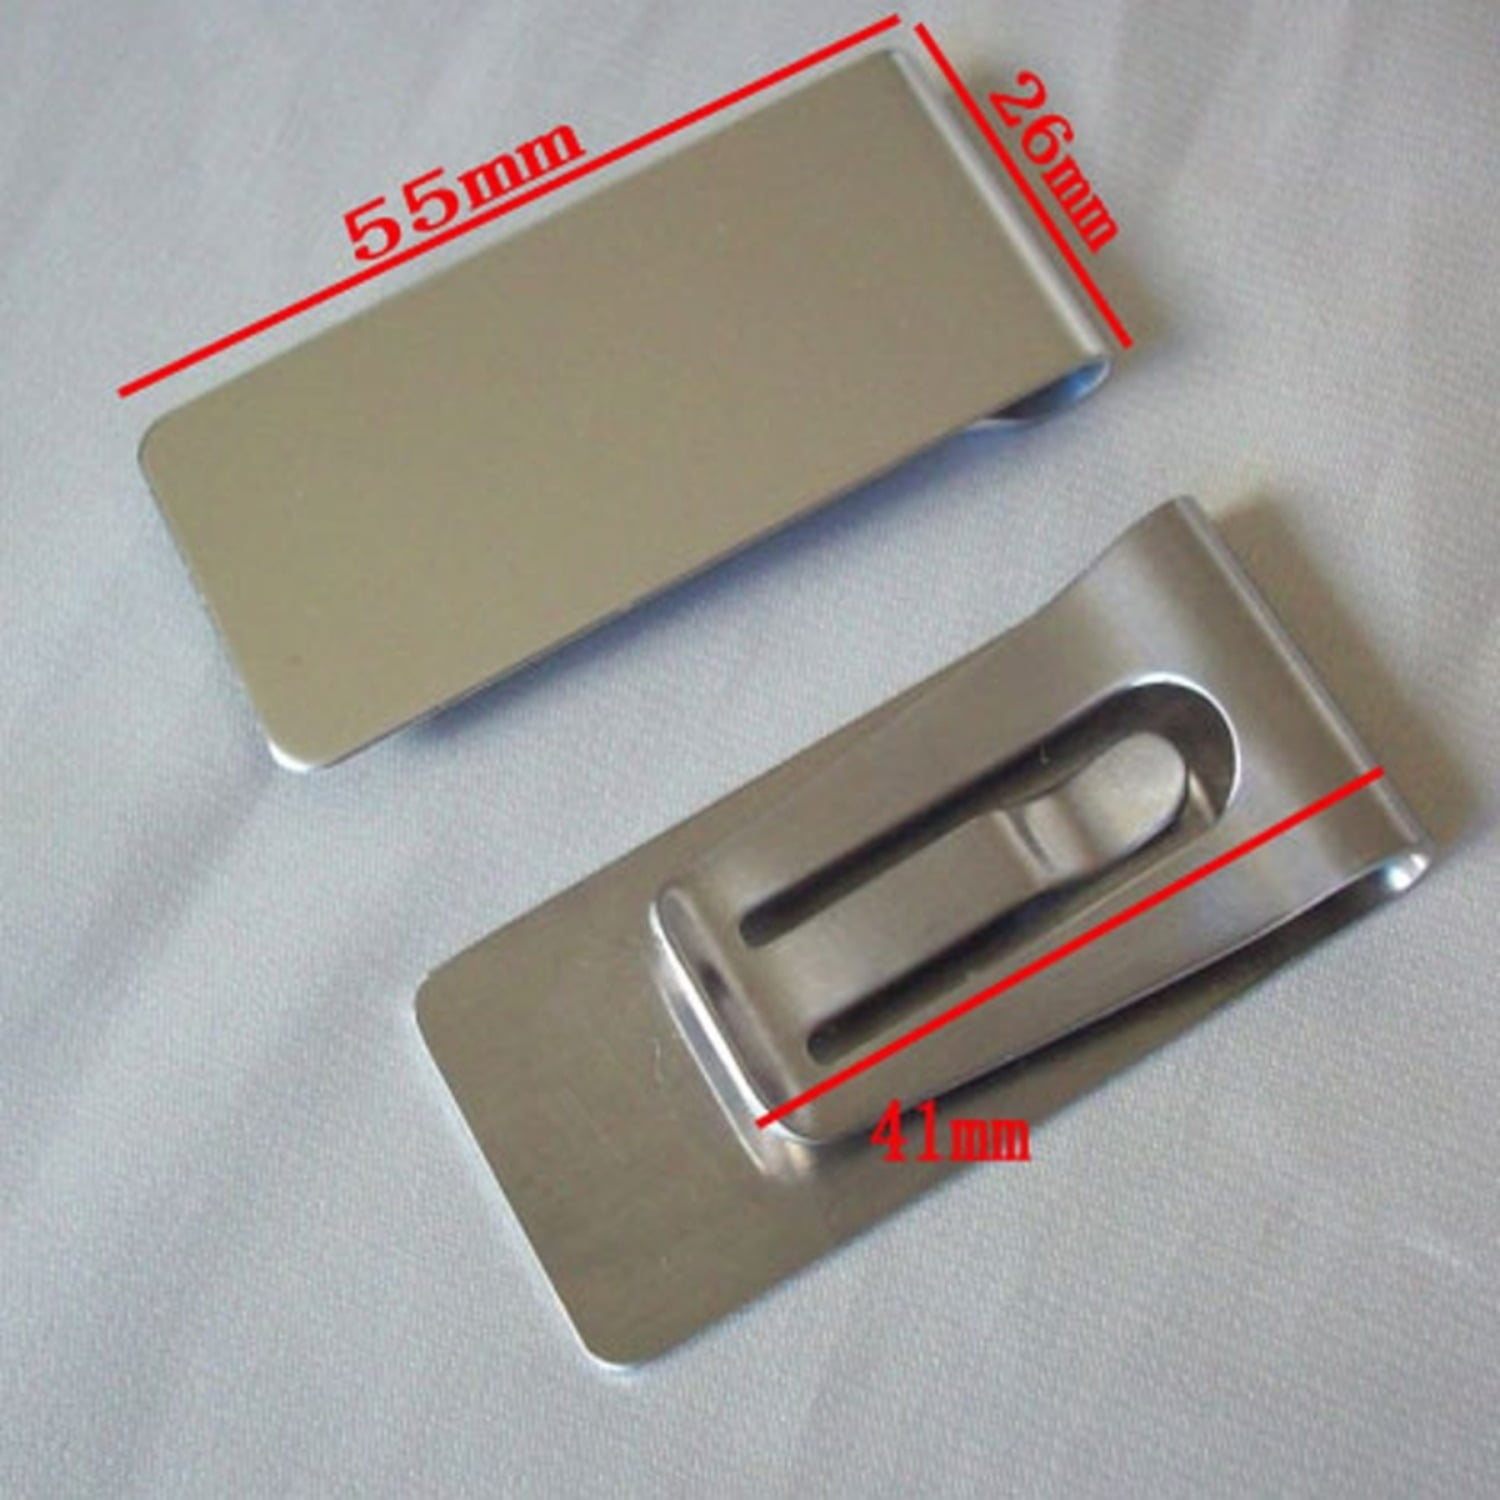 NEW Silver Stainless Steel Money Clip Durable Compact Stylish Design 